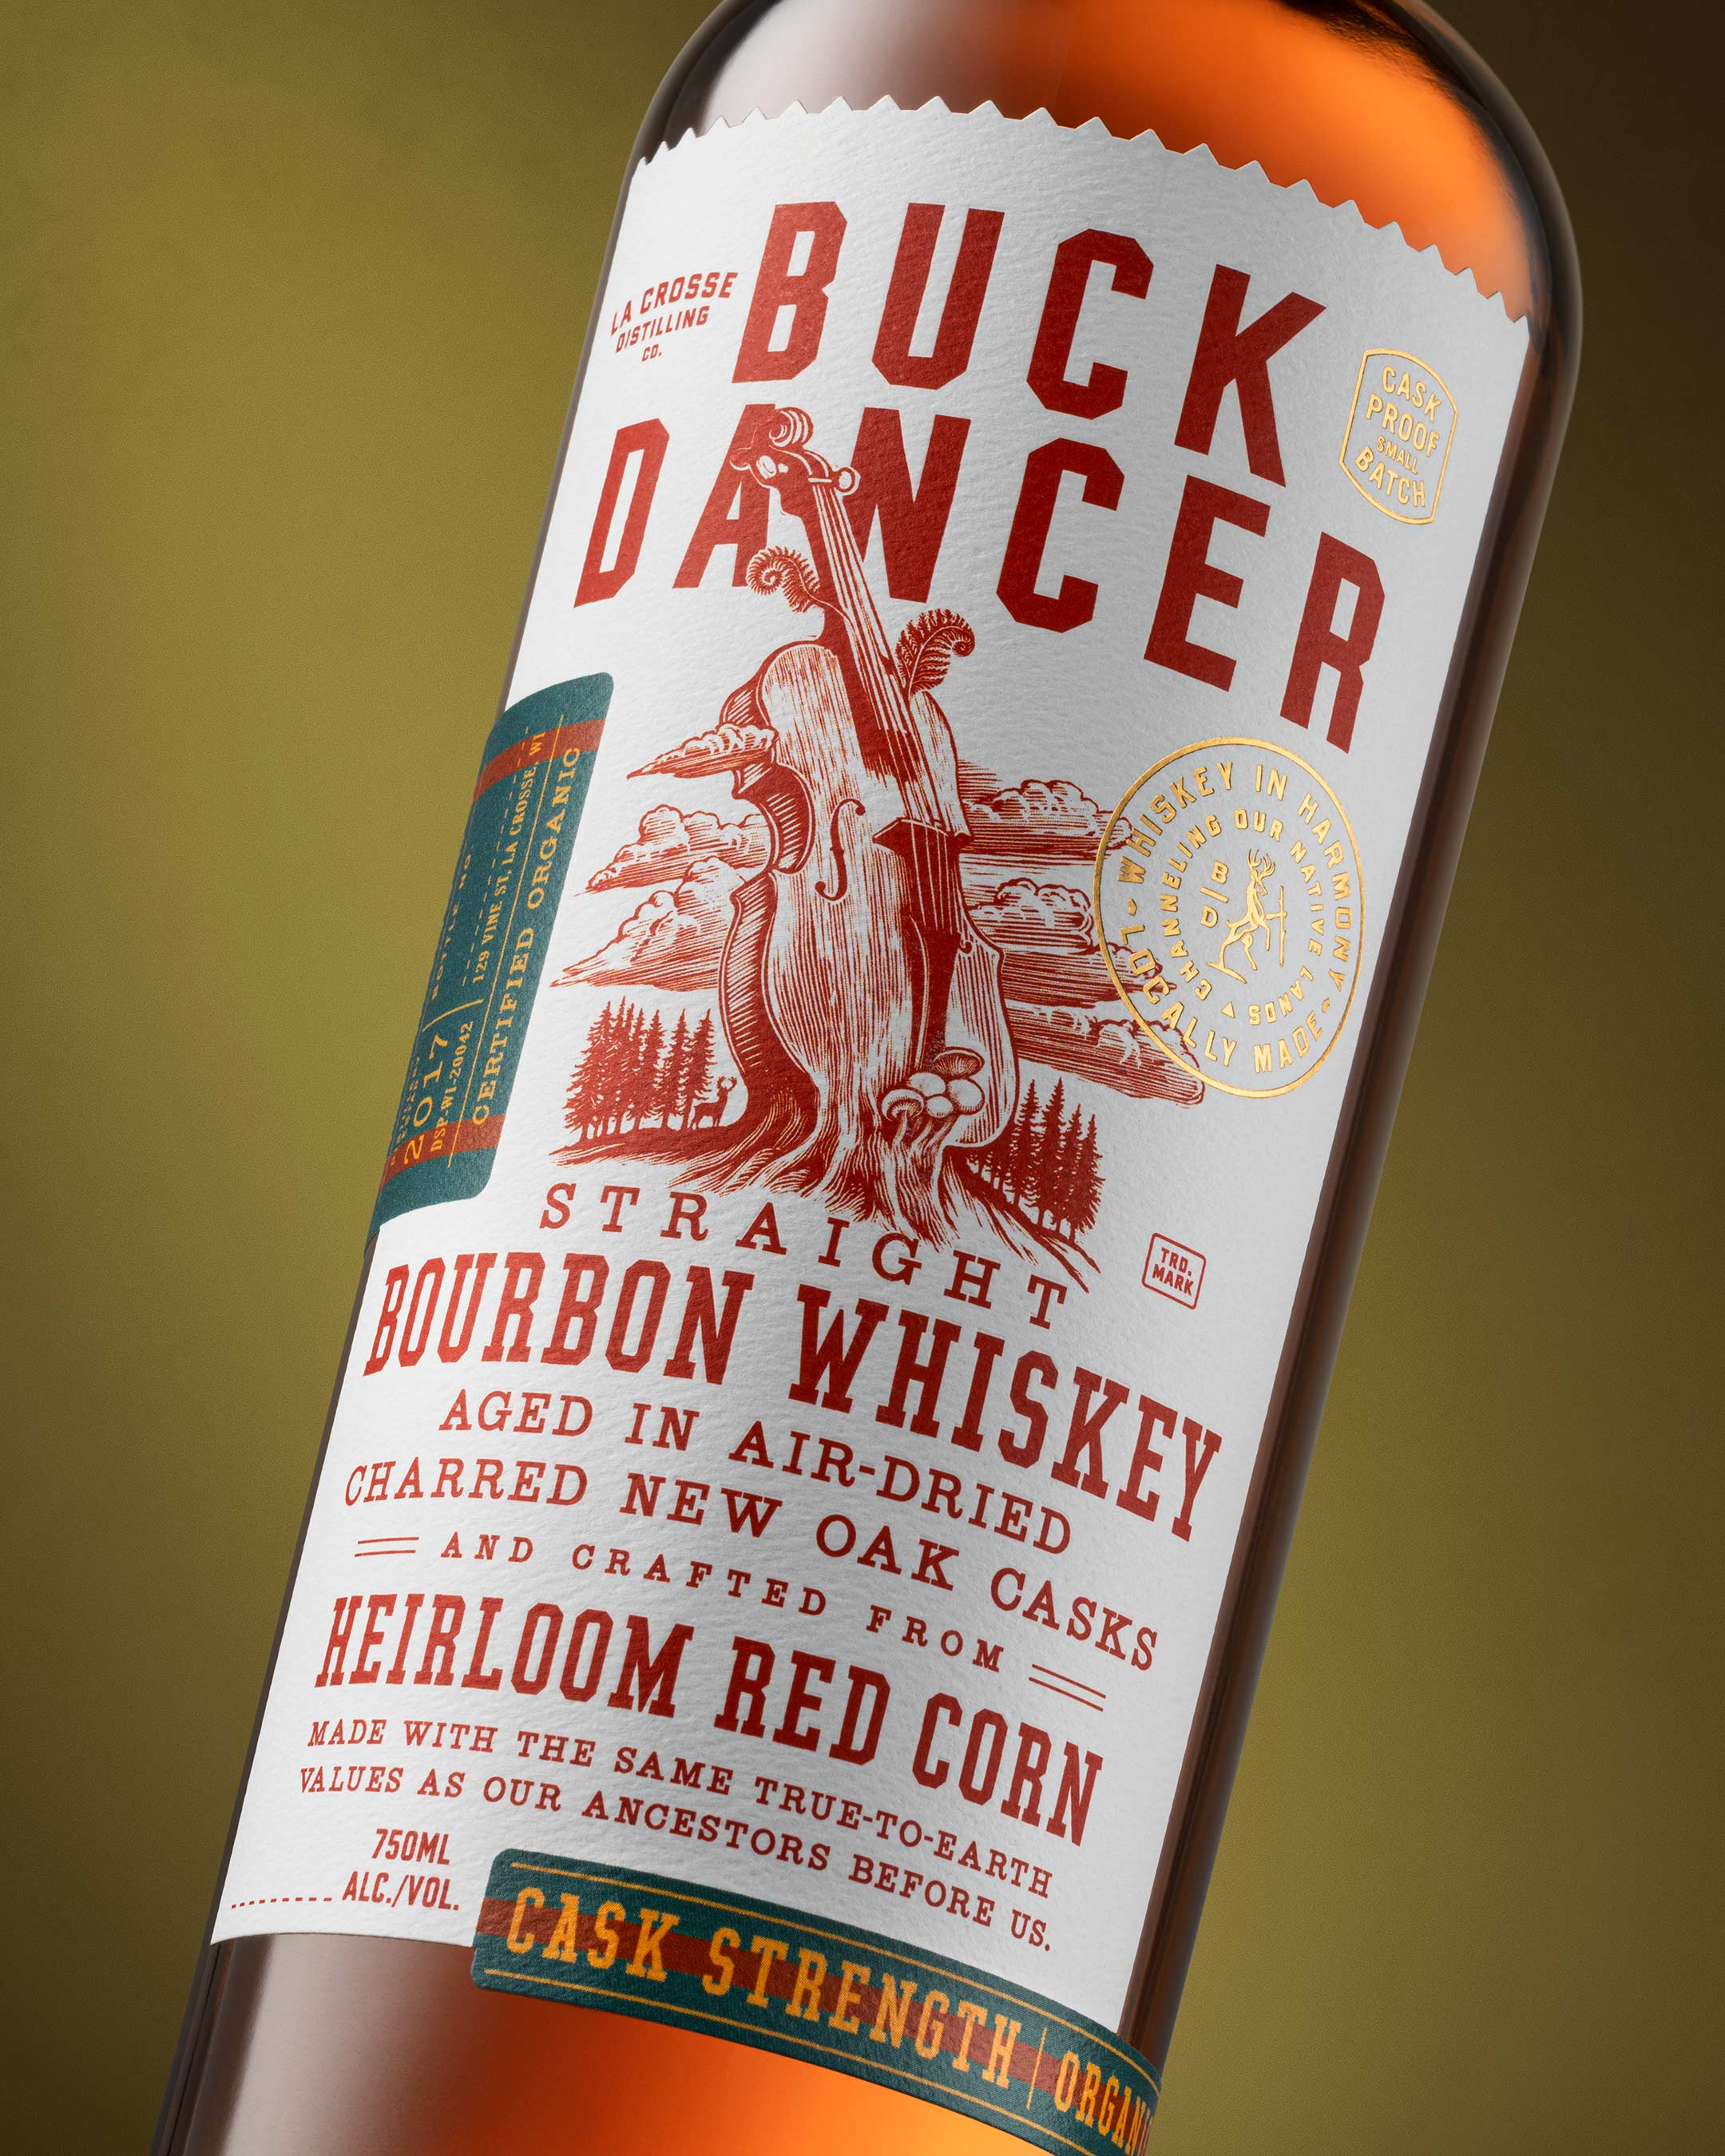 A Whiskey in Harmony – Buck Dancer Bourbon Label Design by Chad Michael Studio